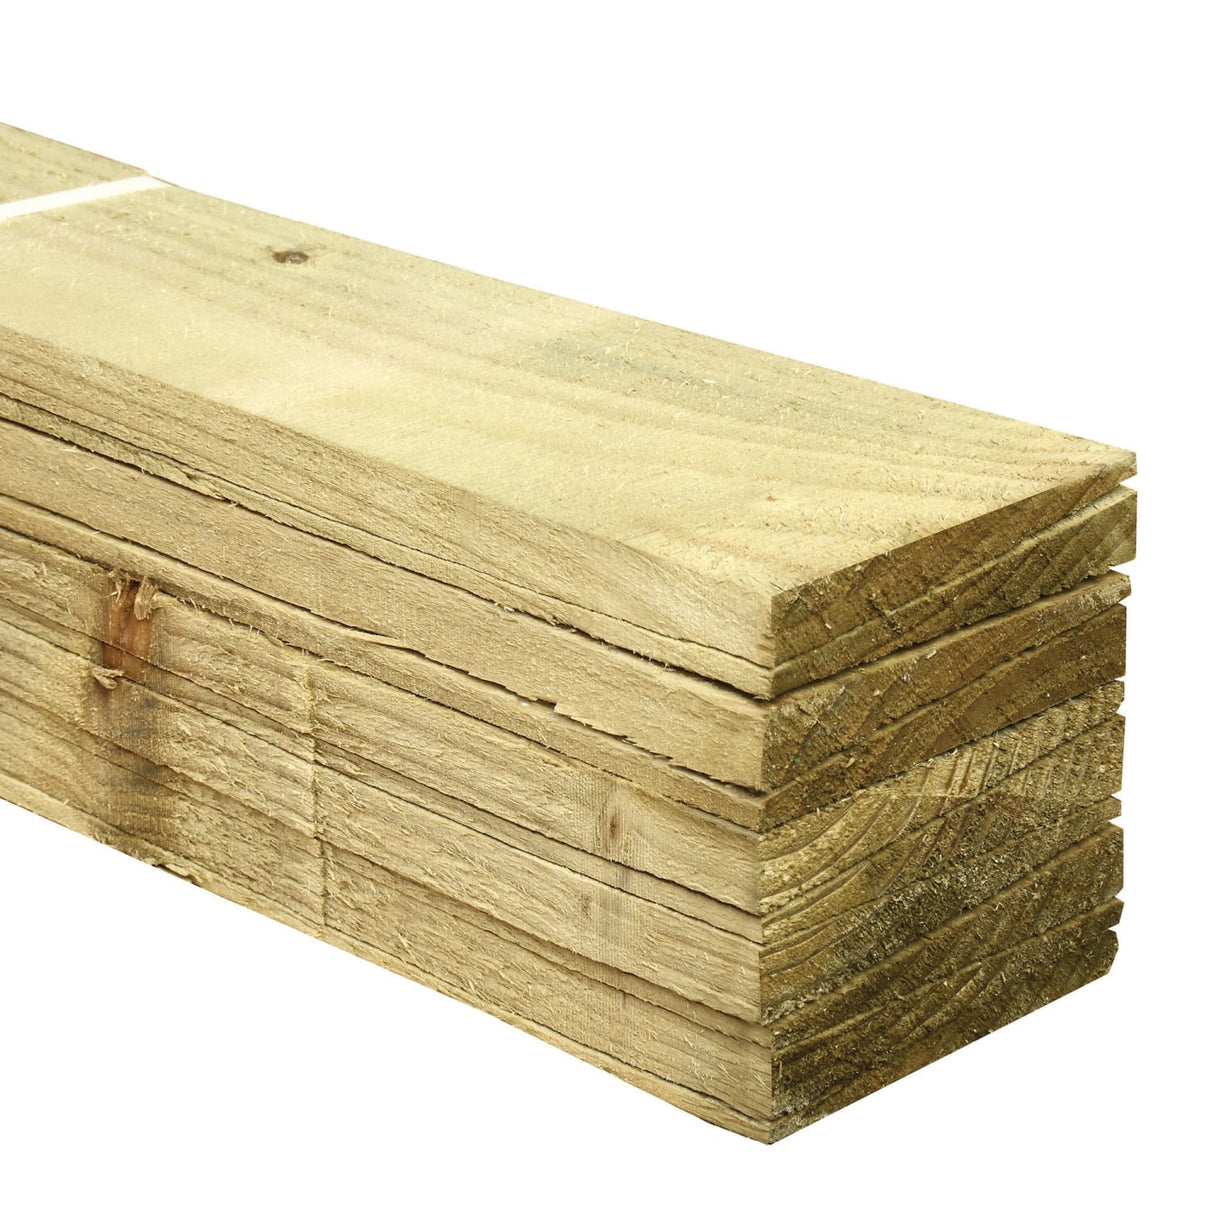 Feather Edge Fencing Boards Pressure Treated Green 150mm